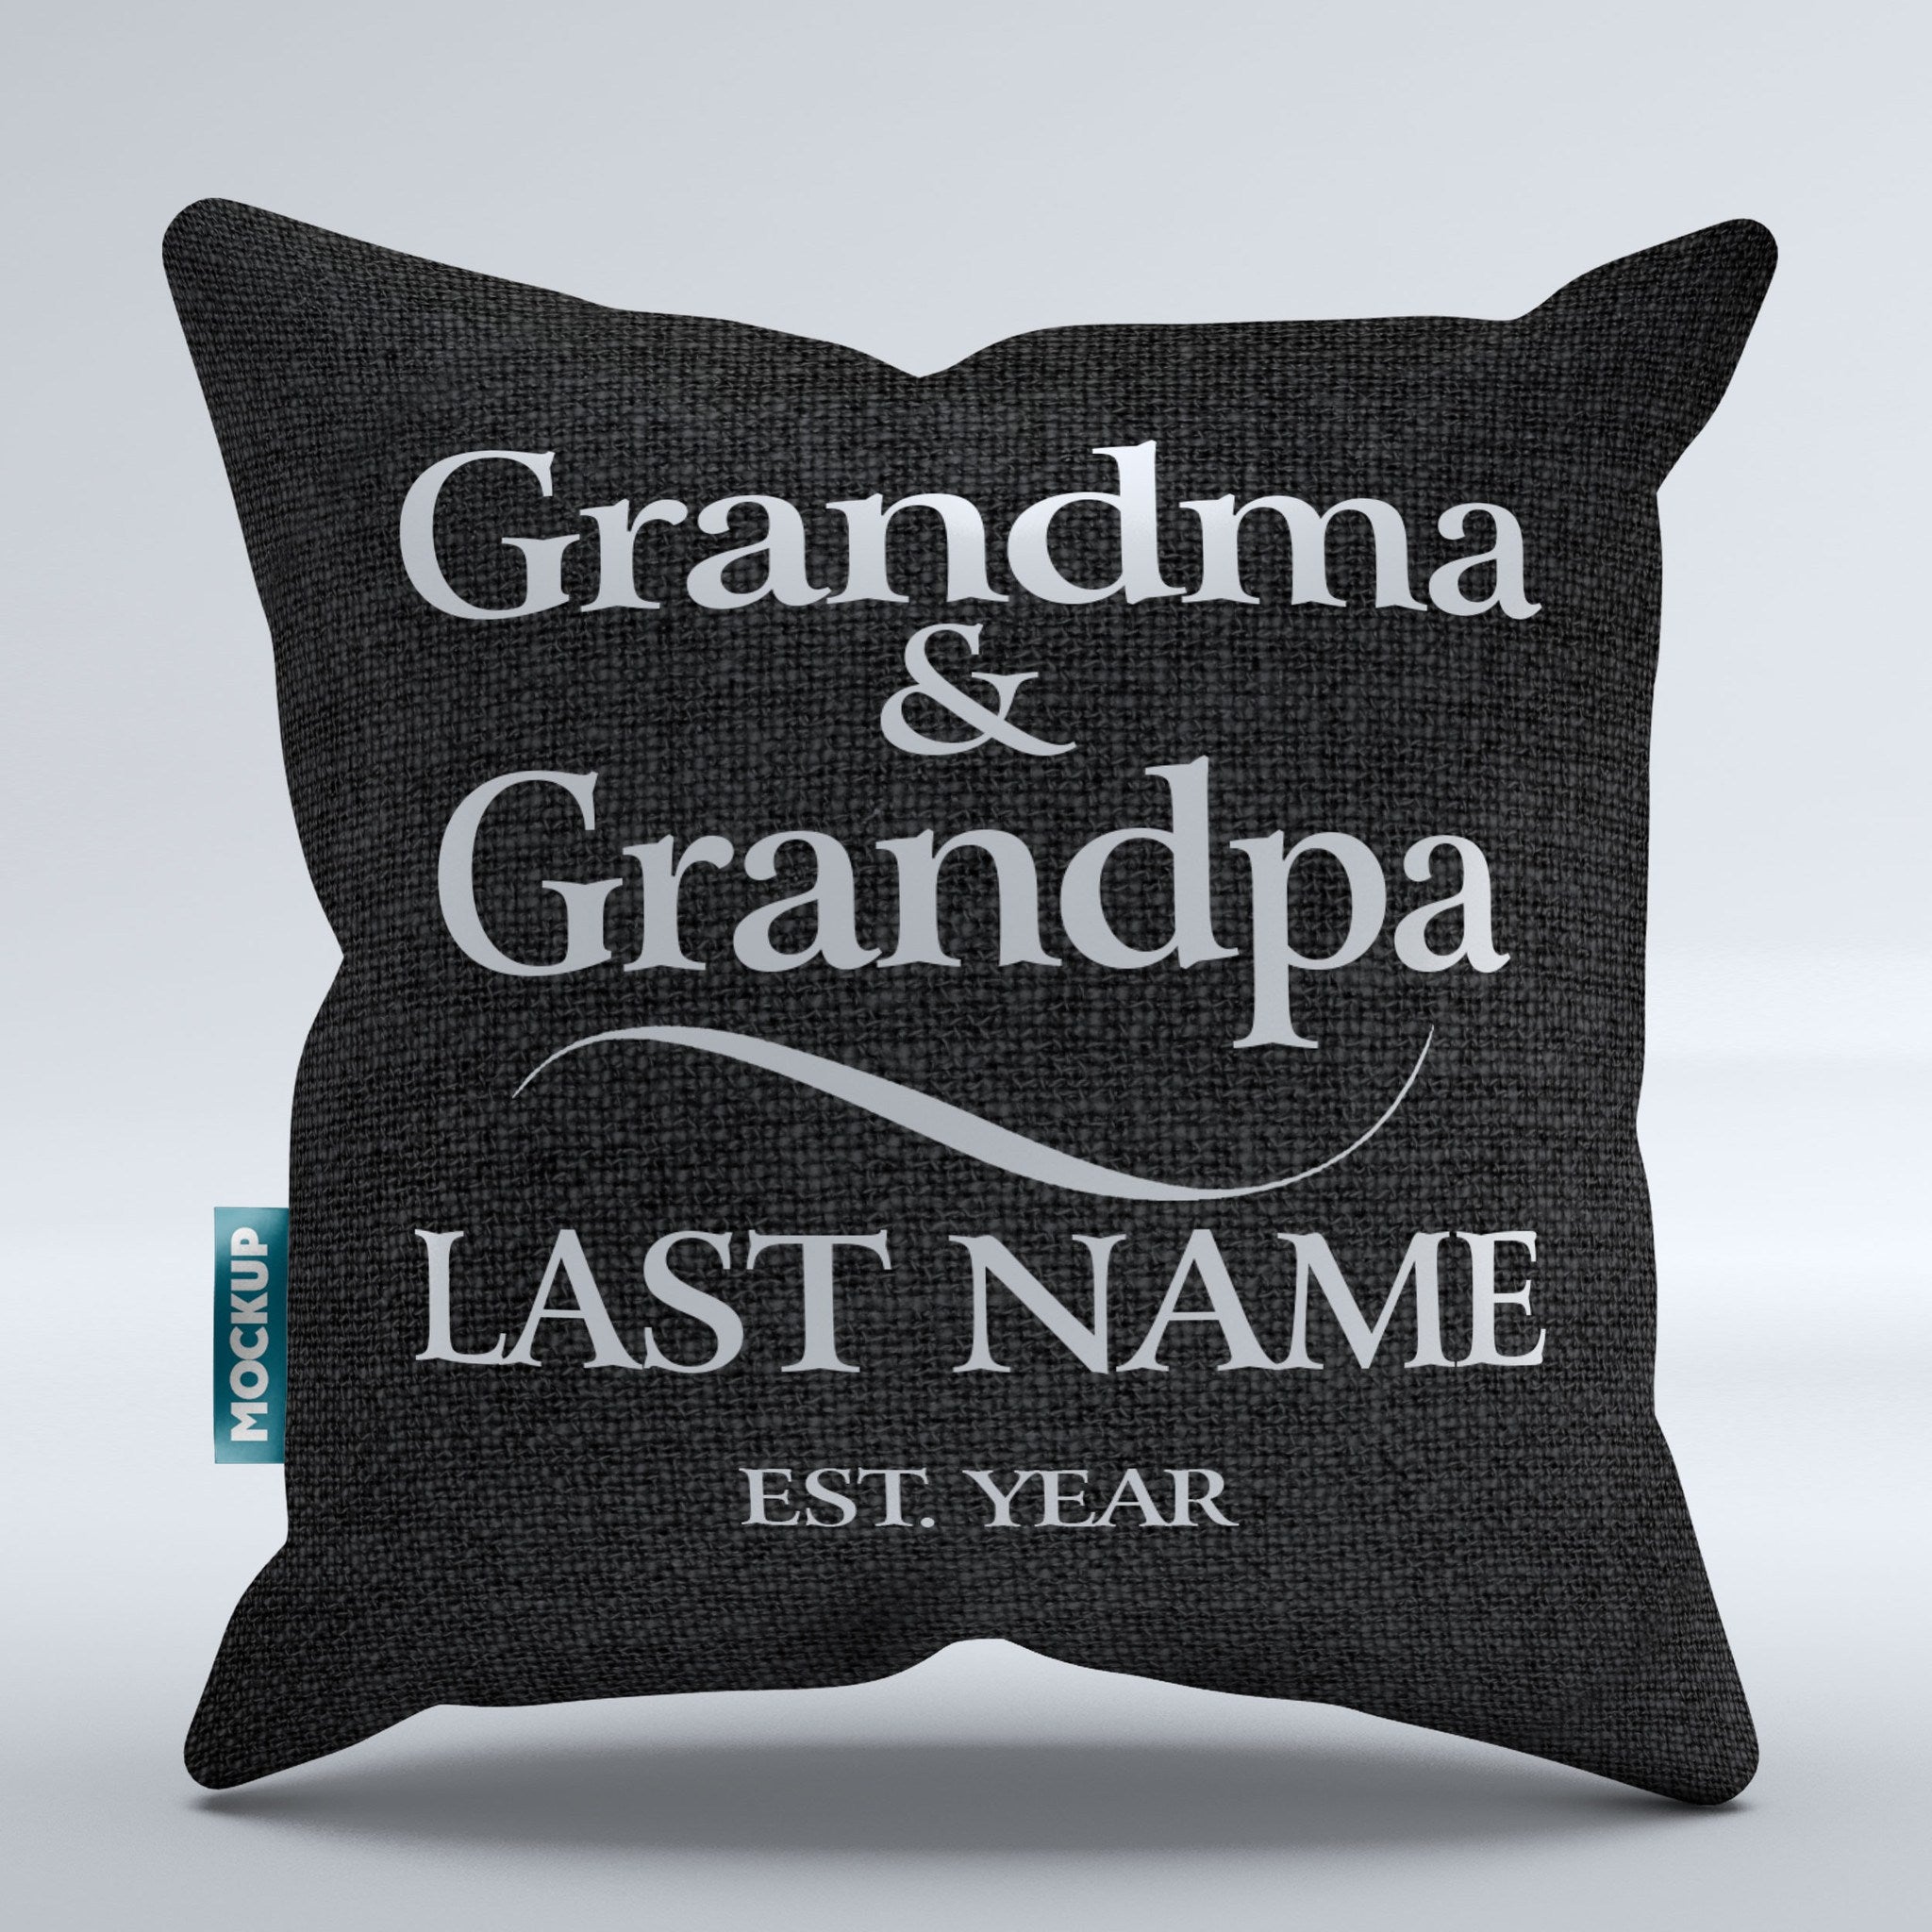 Grandma and Grandpa Personalized Throw Pillow Cover - 18" x 18"